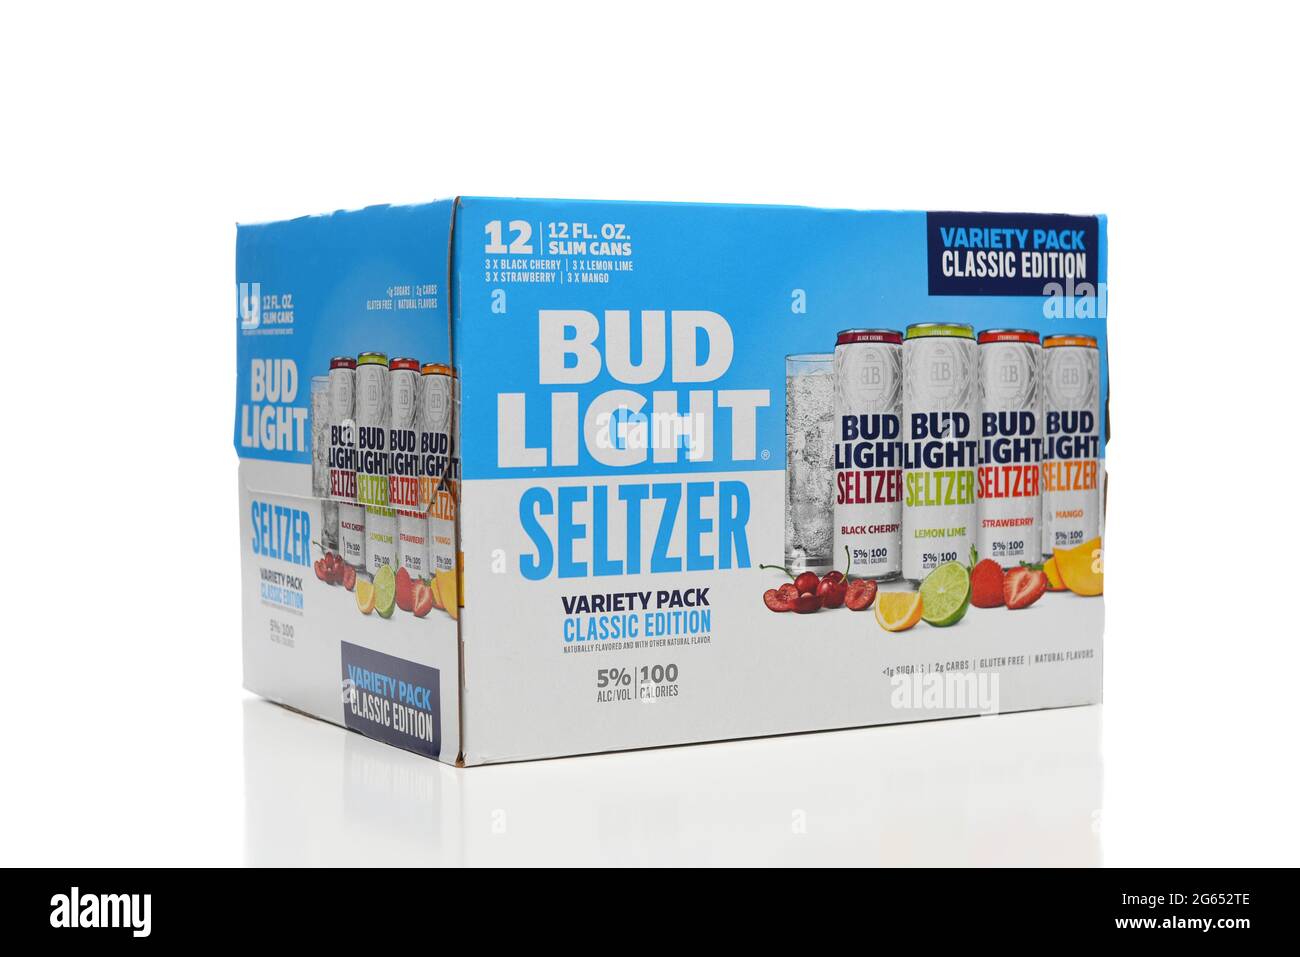 IRIVNE, CAIFORNIA - 2 JULY 2021: Bud Light Seltzer 12 pack side end view. Lemon Lime, Mango, Strawberry and Black Cherry flavored alocoholic beverage. Stock Photo